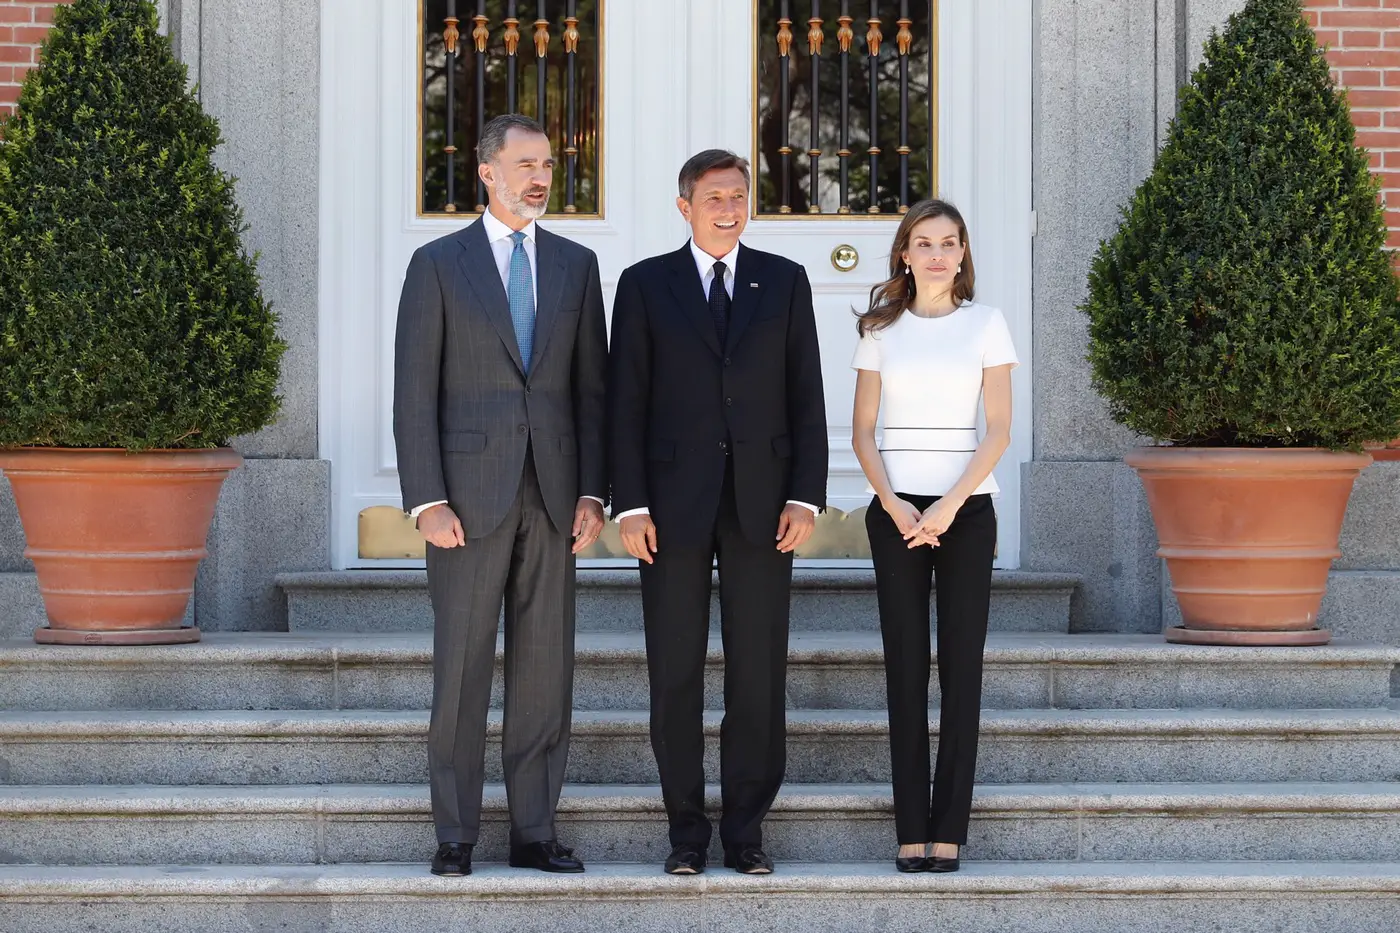 Queen Letizia was Monochrome Chic for Lunch at Palace